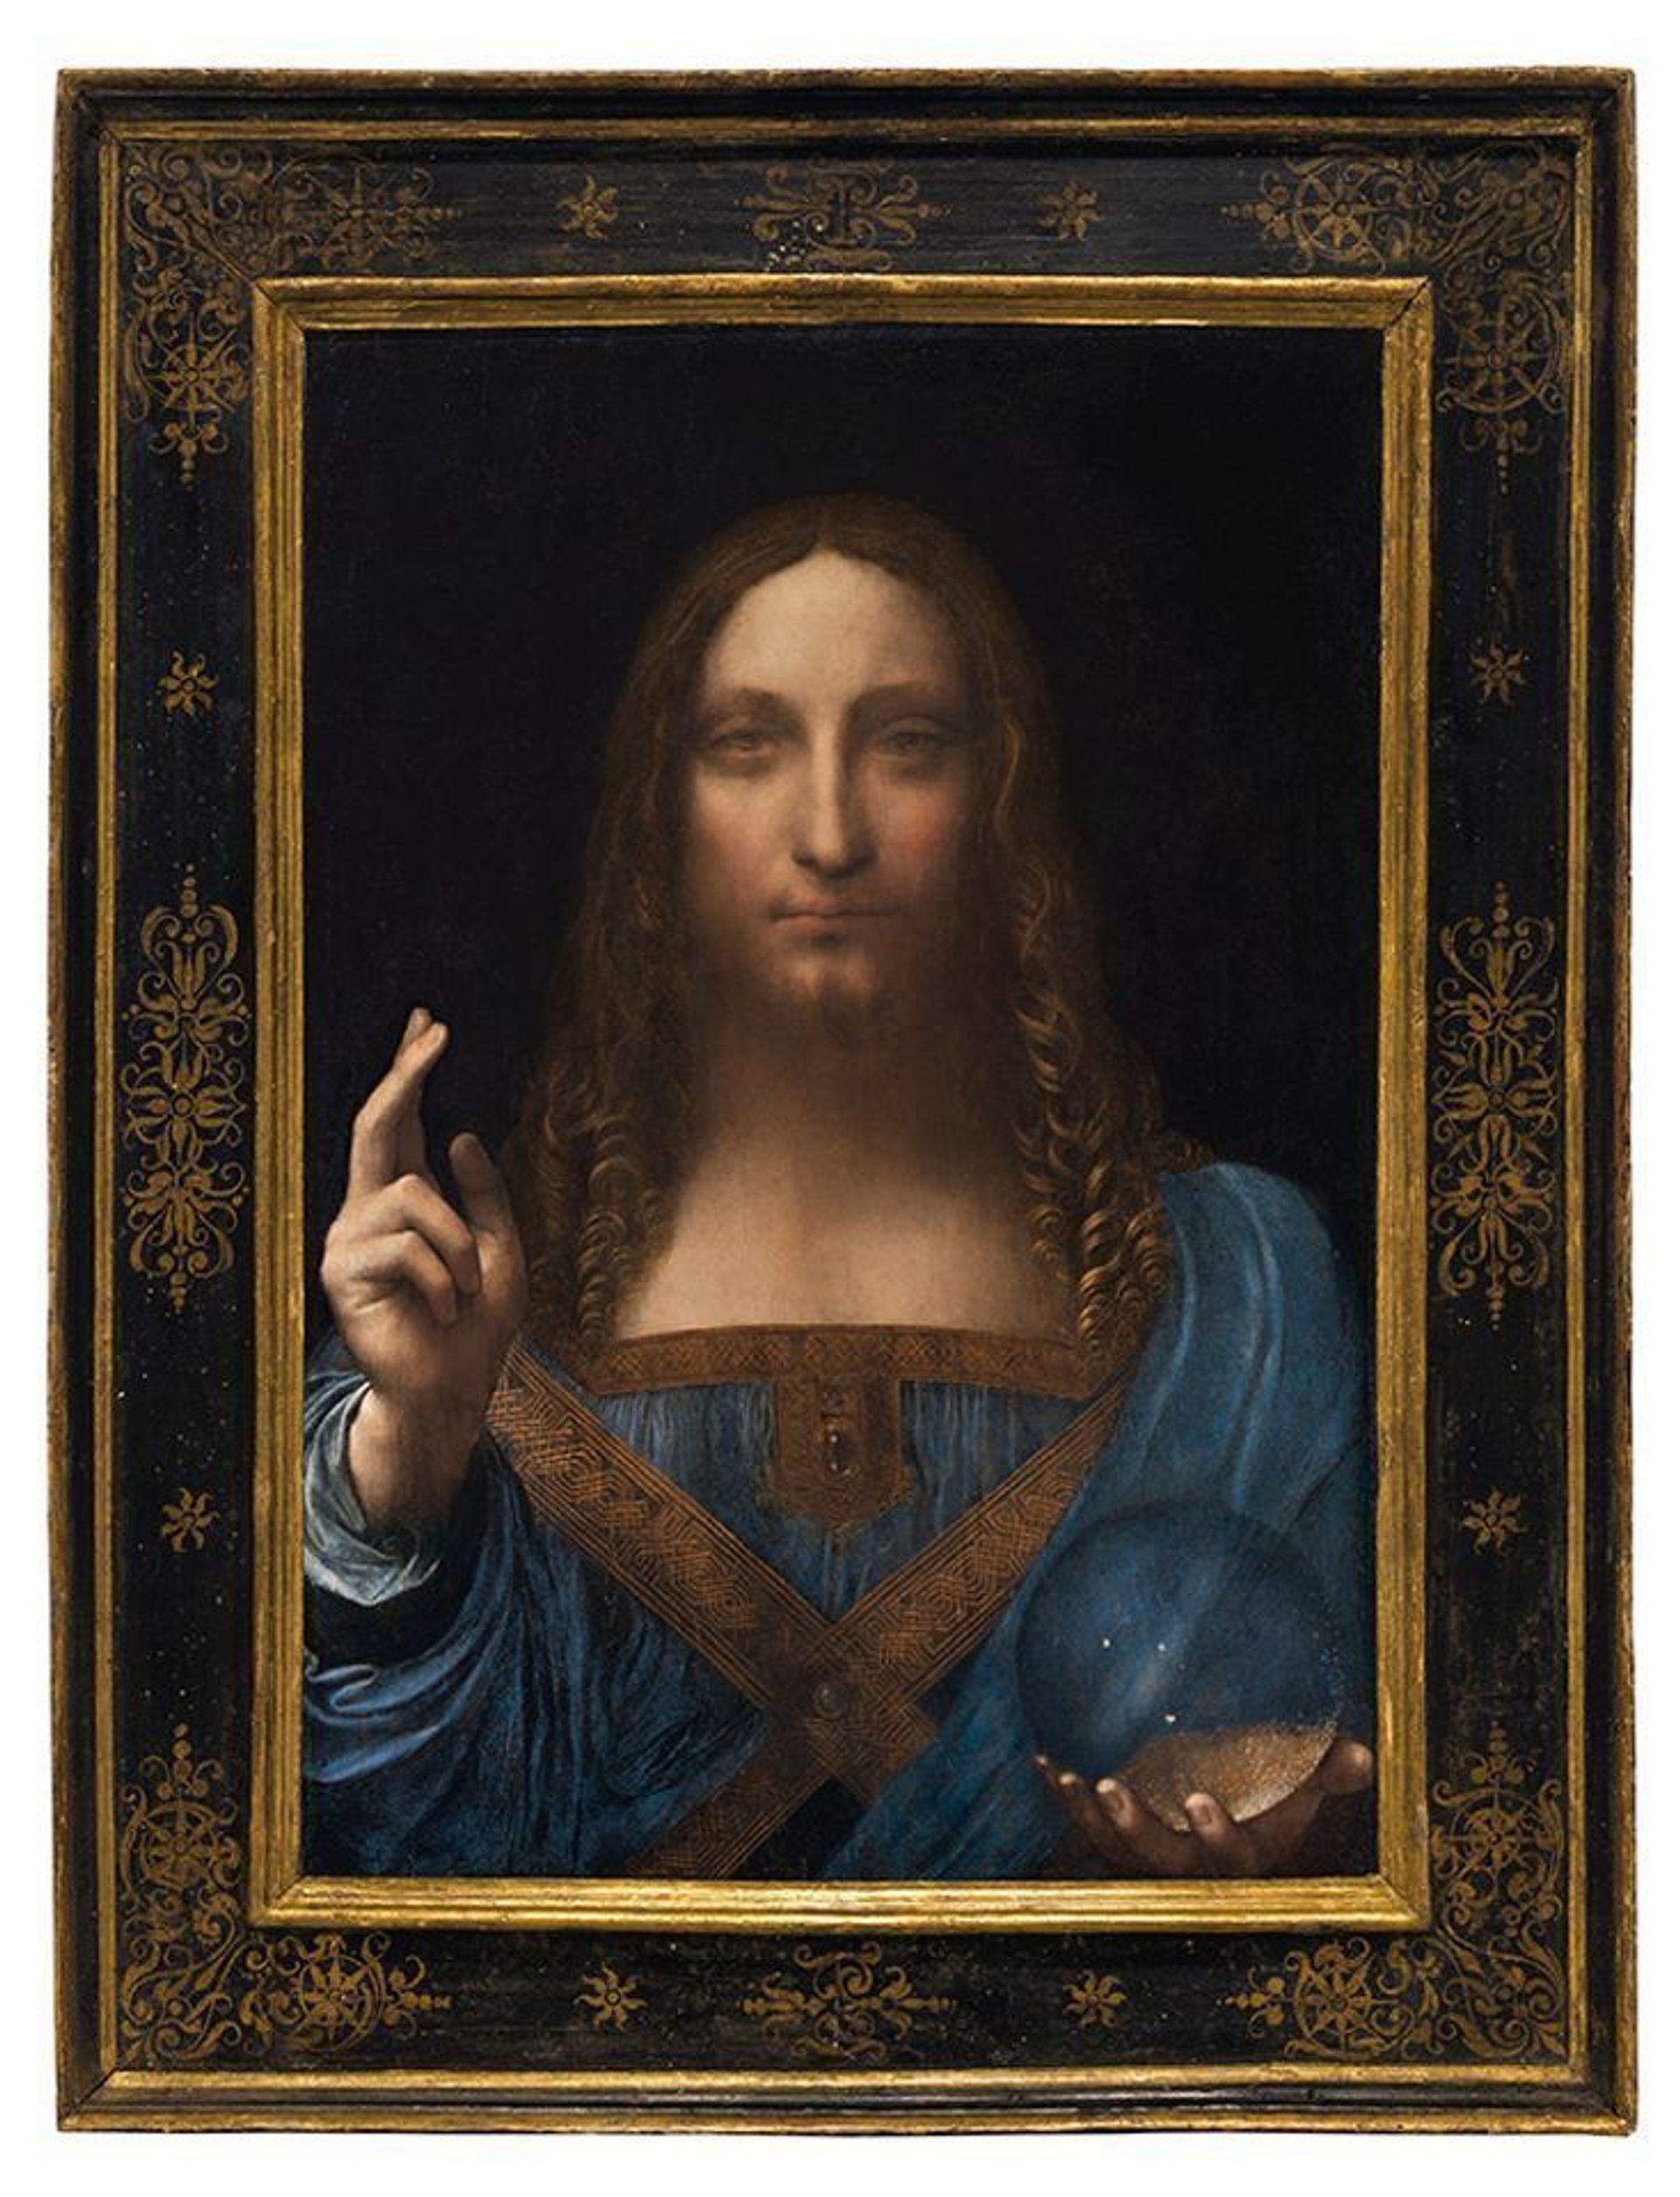 Leonardo’s Salvator Mundi may have been up for sale when it went on show at the National Gallery in London 